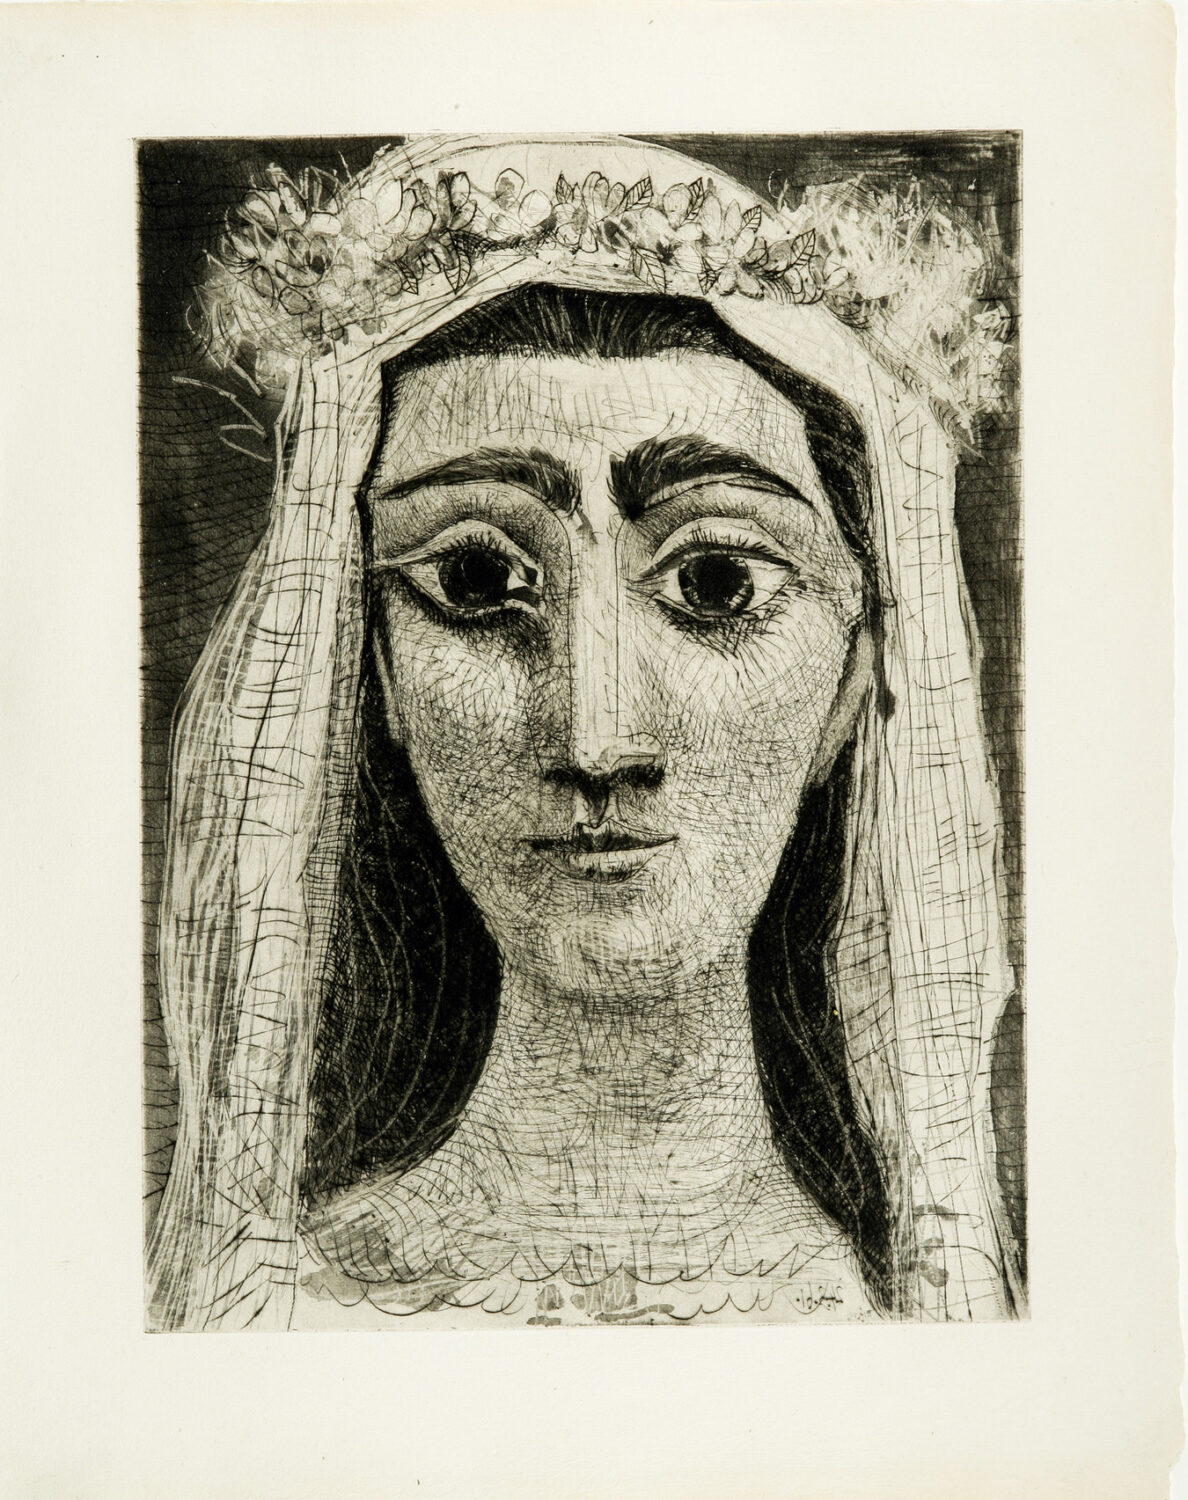 thumbnail of Aquatint, Scraper, Drypoint, Velo and Engraving by Pablo Picasso titled Jacqueline en Mariee, de Face 1.